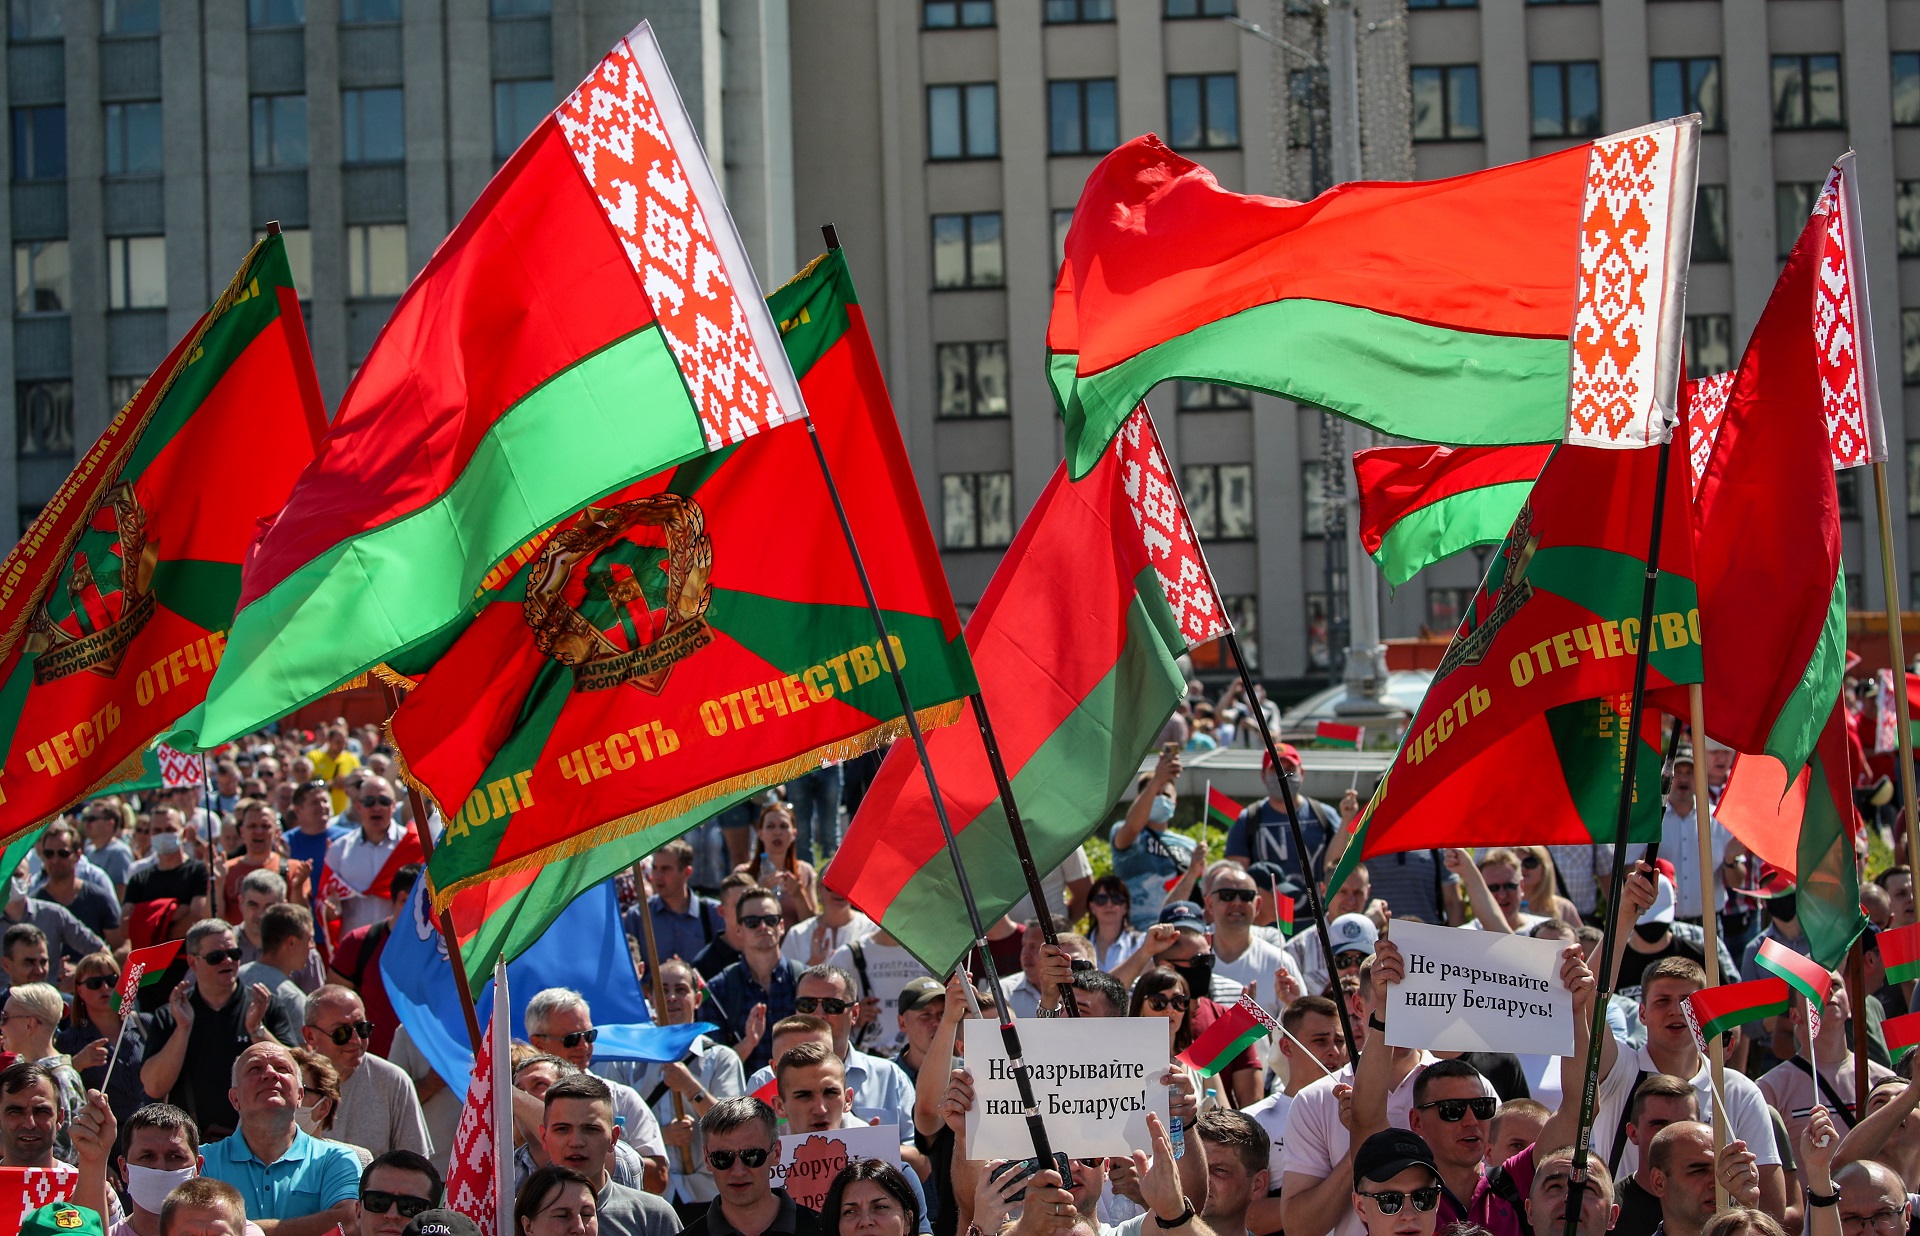 epa08606793 Supporters of Belarusian President Alexander Lukashenko wave national flags as they take part in a rally in Minsk, Belarus, 16 August 2020. Long-time President Lukashenko is under mounting pressure after unrest erupted in Belarus over alleged poll-rigging and police violence at protests following election results claiming that he won a landslide victory in the 09 August elections. As unrest continued in the country as of 15 August, Lukashenko sought the help of Russian President Vladimir Putin asking assistance in the event of external military threats to Belarus, media reported. Opposition leader Tikhanovskaya fled to Lithuania after rejecting the election results she claimed was rigged. Following the deathly crackdown on protesters, EU foreign ministers, during a video conference in Brussels on 14 August, approved sanctions against responsible officials in Belarus.  EPA/TATYANA ZENKOVICH